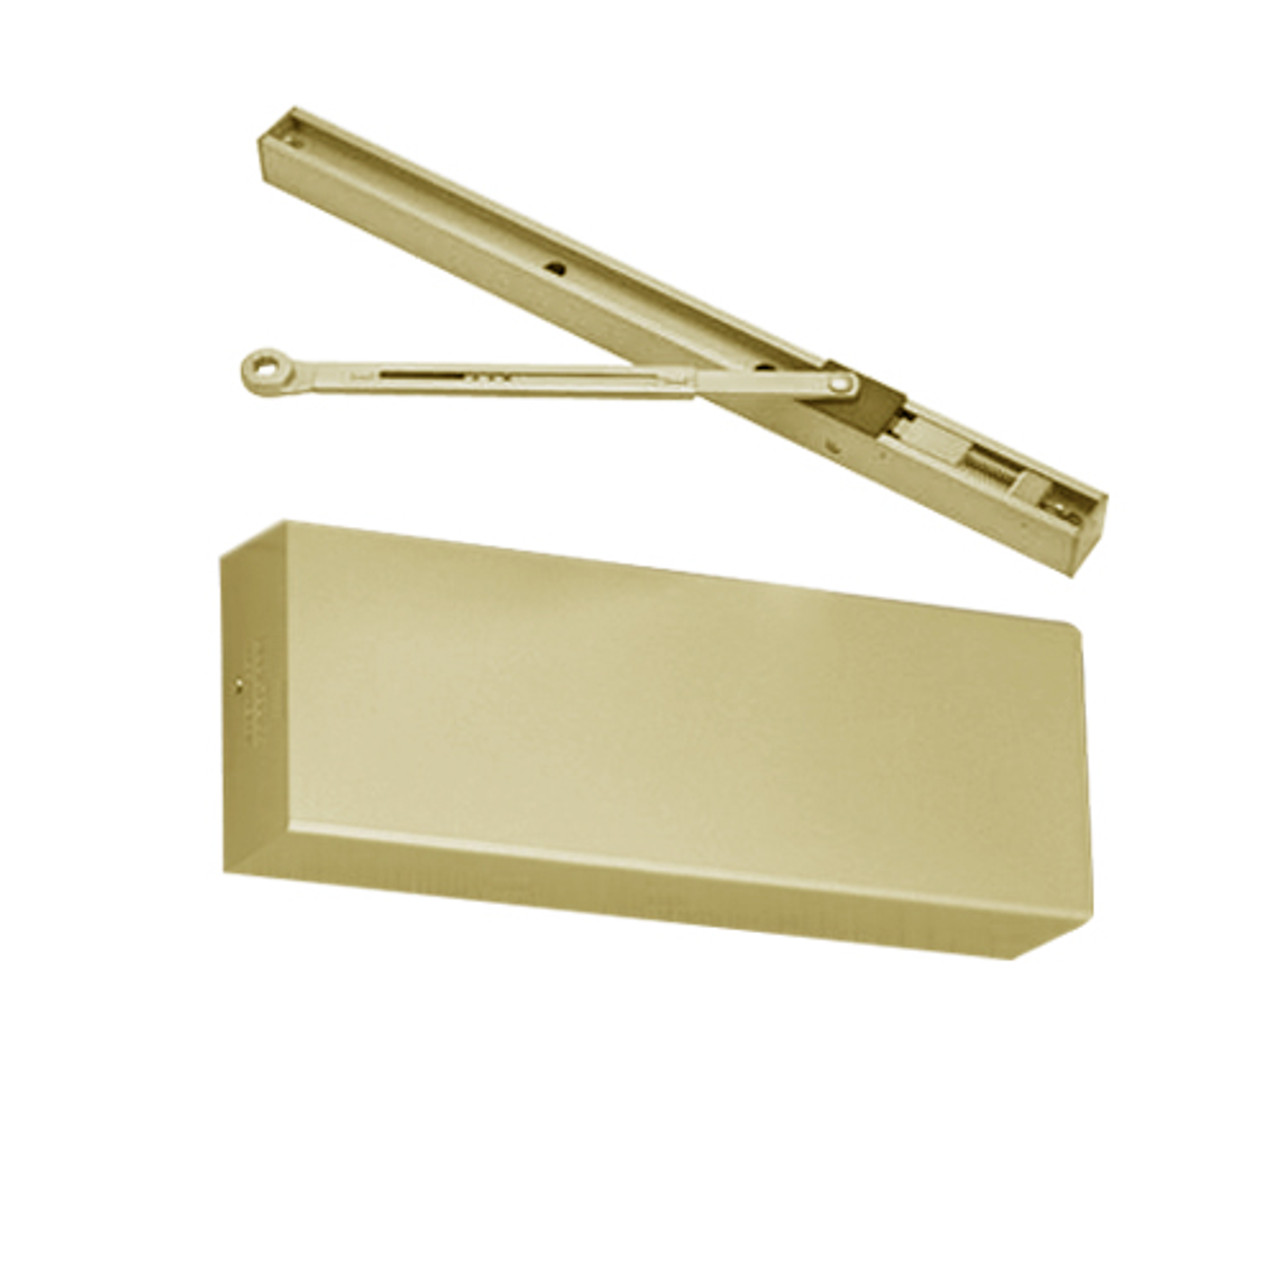 PS9500STDA-696 Norton 9500 Series Non-Hold Open Cast Iron Door Closer with Push Side Slide Track in Gold Finish